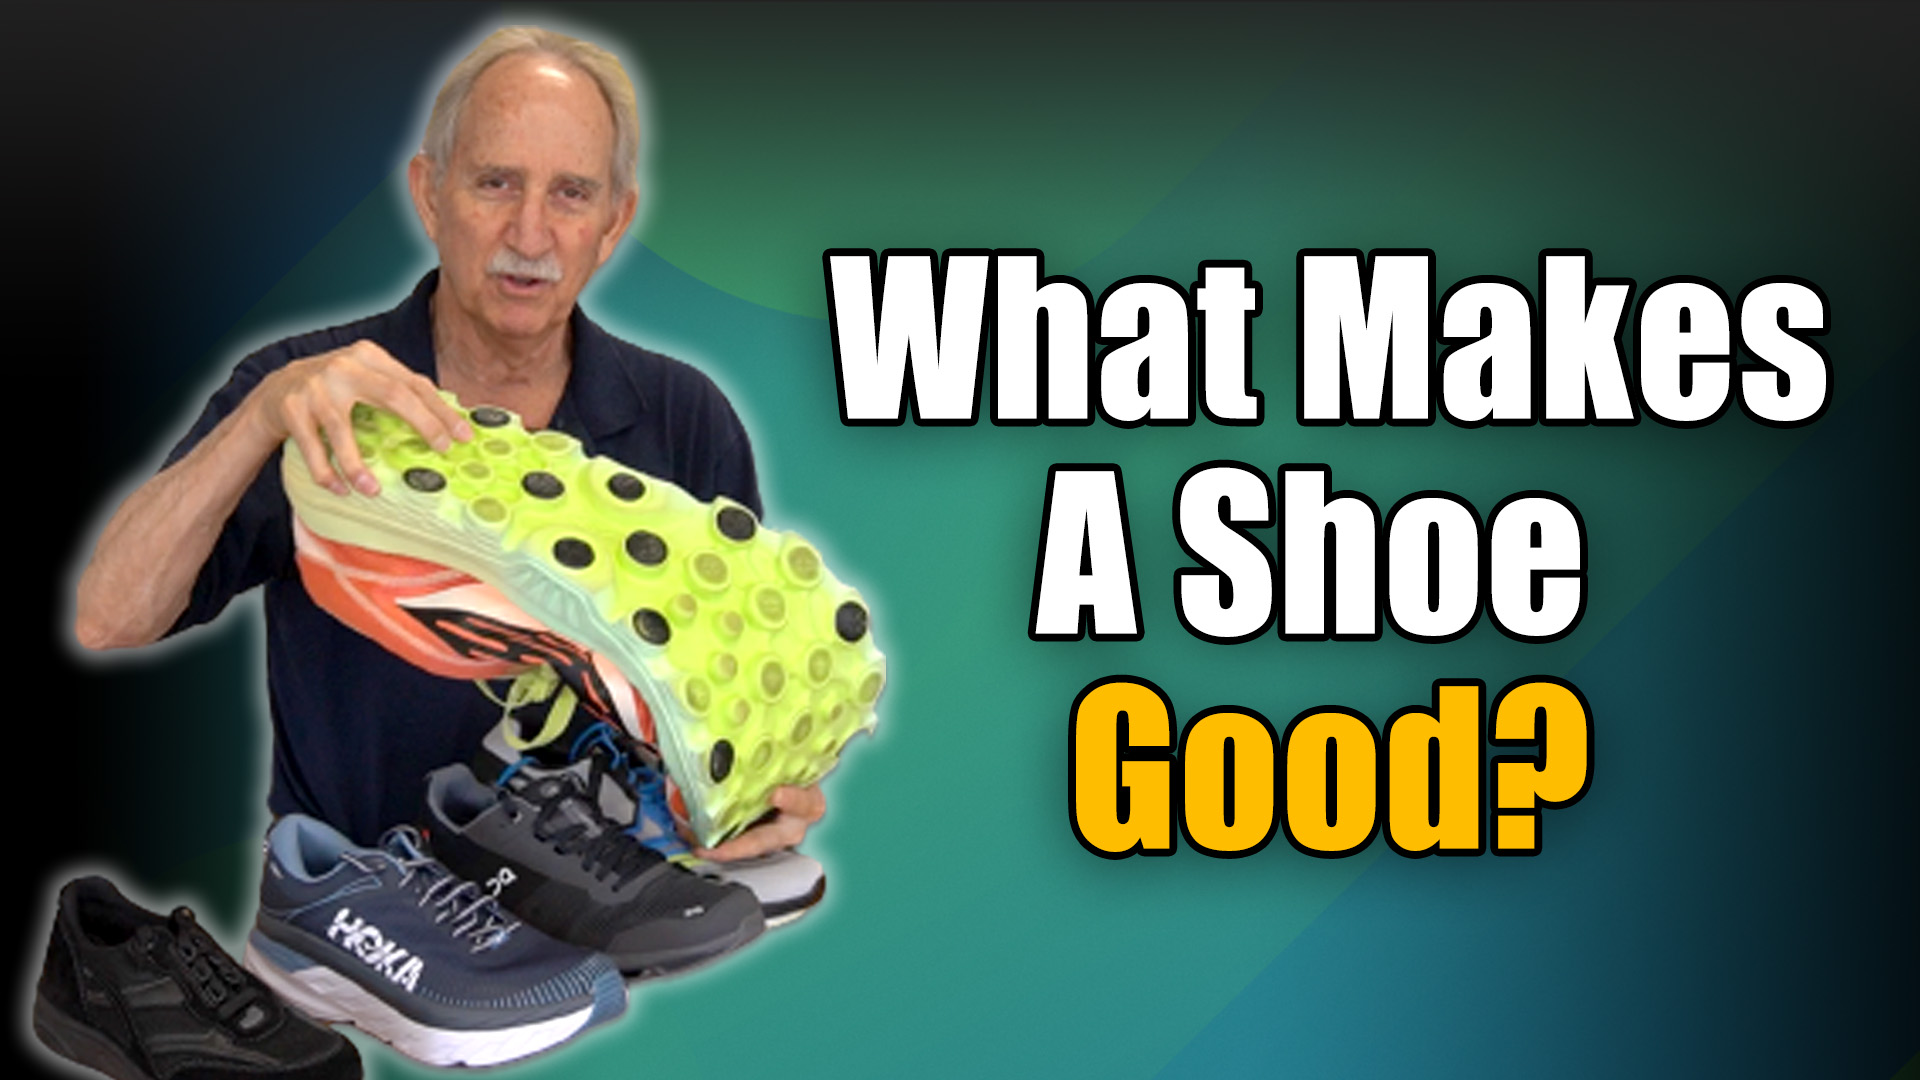 What Makes A Shoe Good?